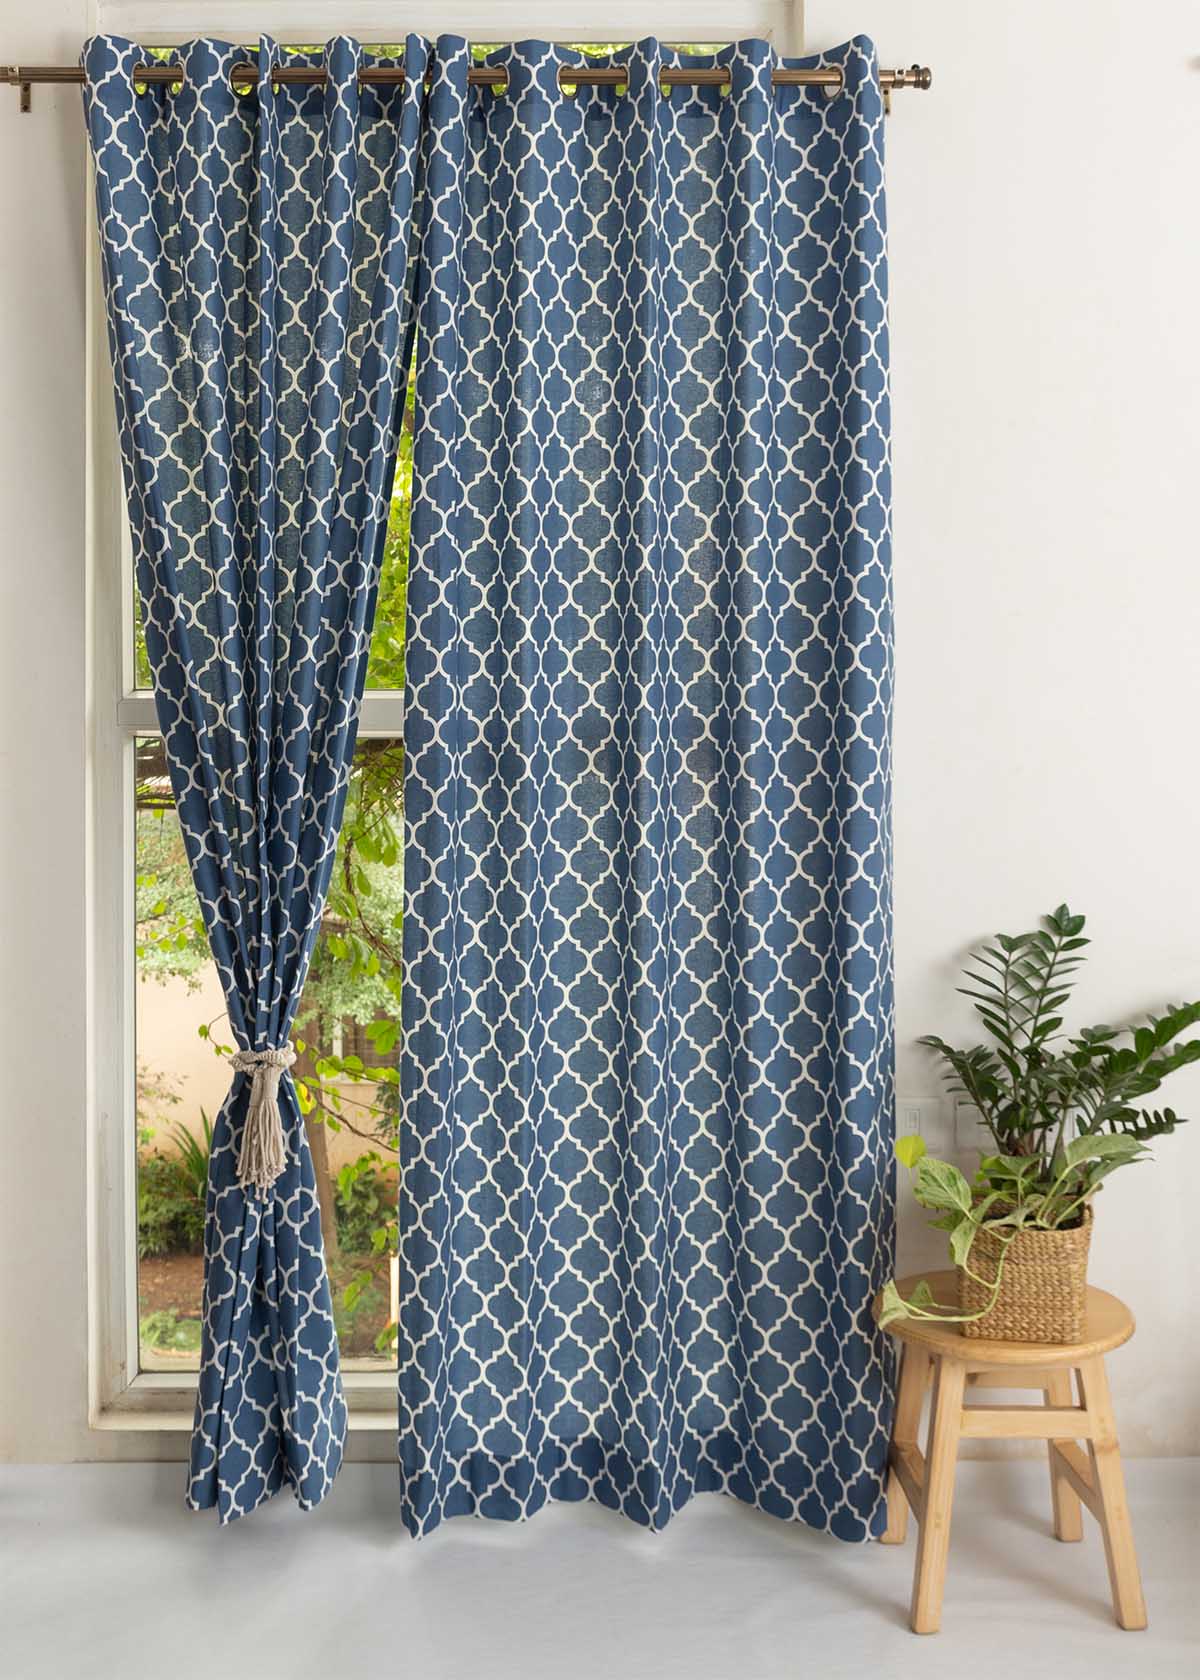 Reverse Trellis 100% cotton geometric curtain for bed room - Room darkening - Royal Blue - Pack of 1